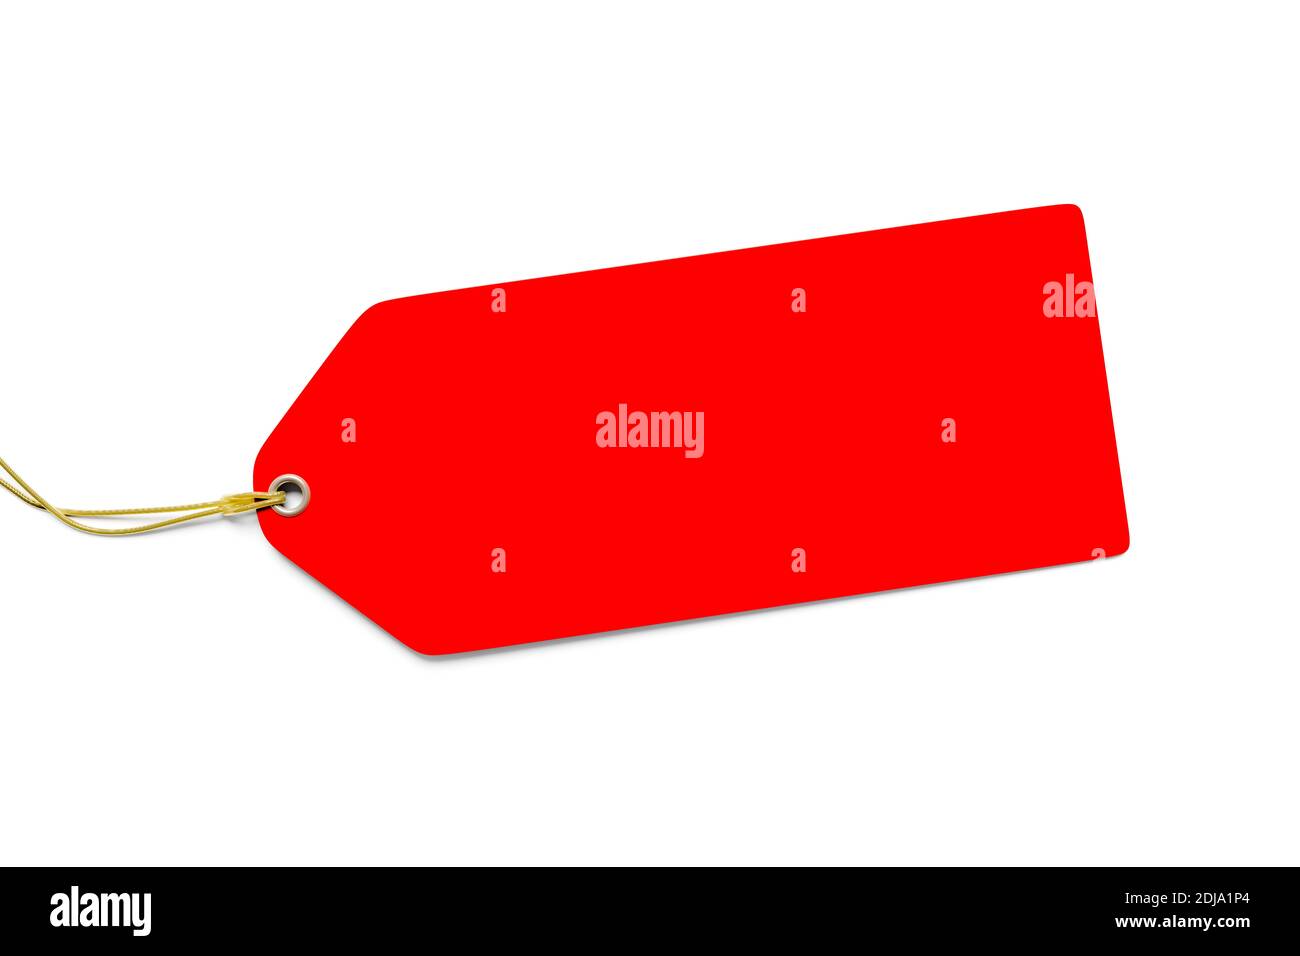 3d illustration of a typical red price tag isolated on white background Stock Photo